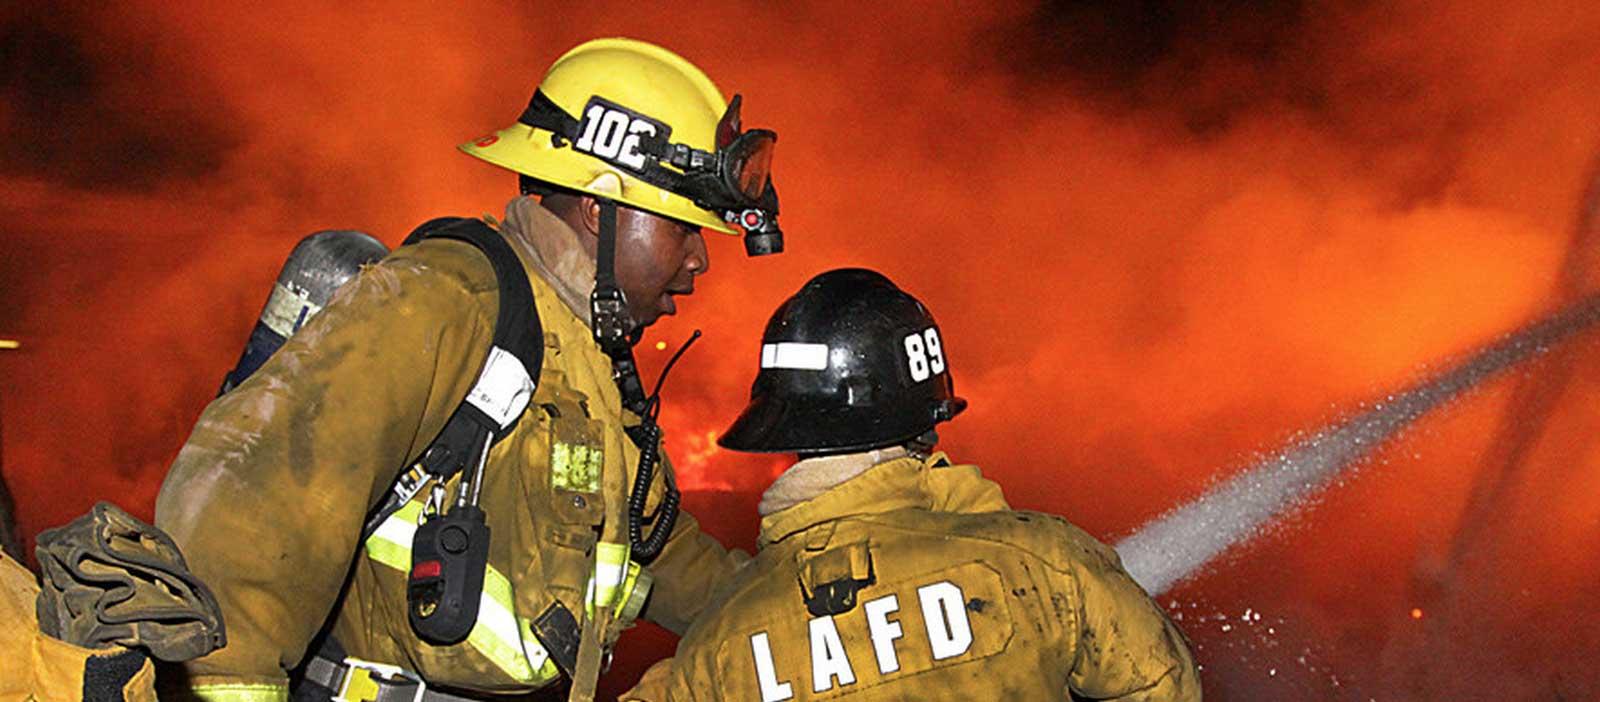 LAFD Fire Fighting